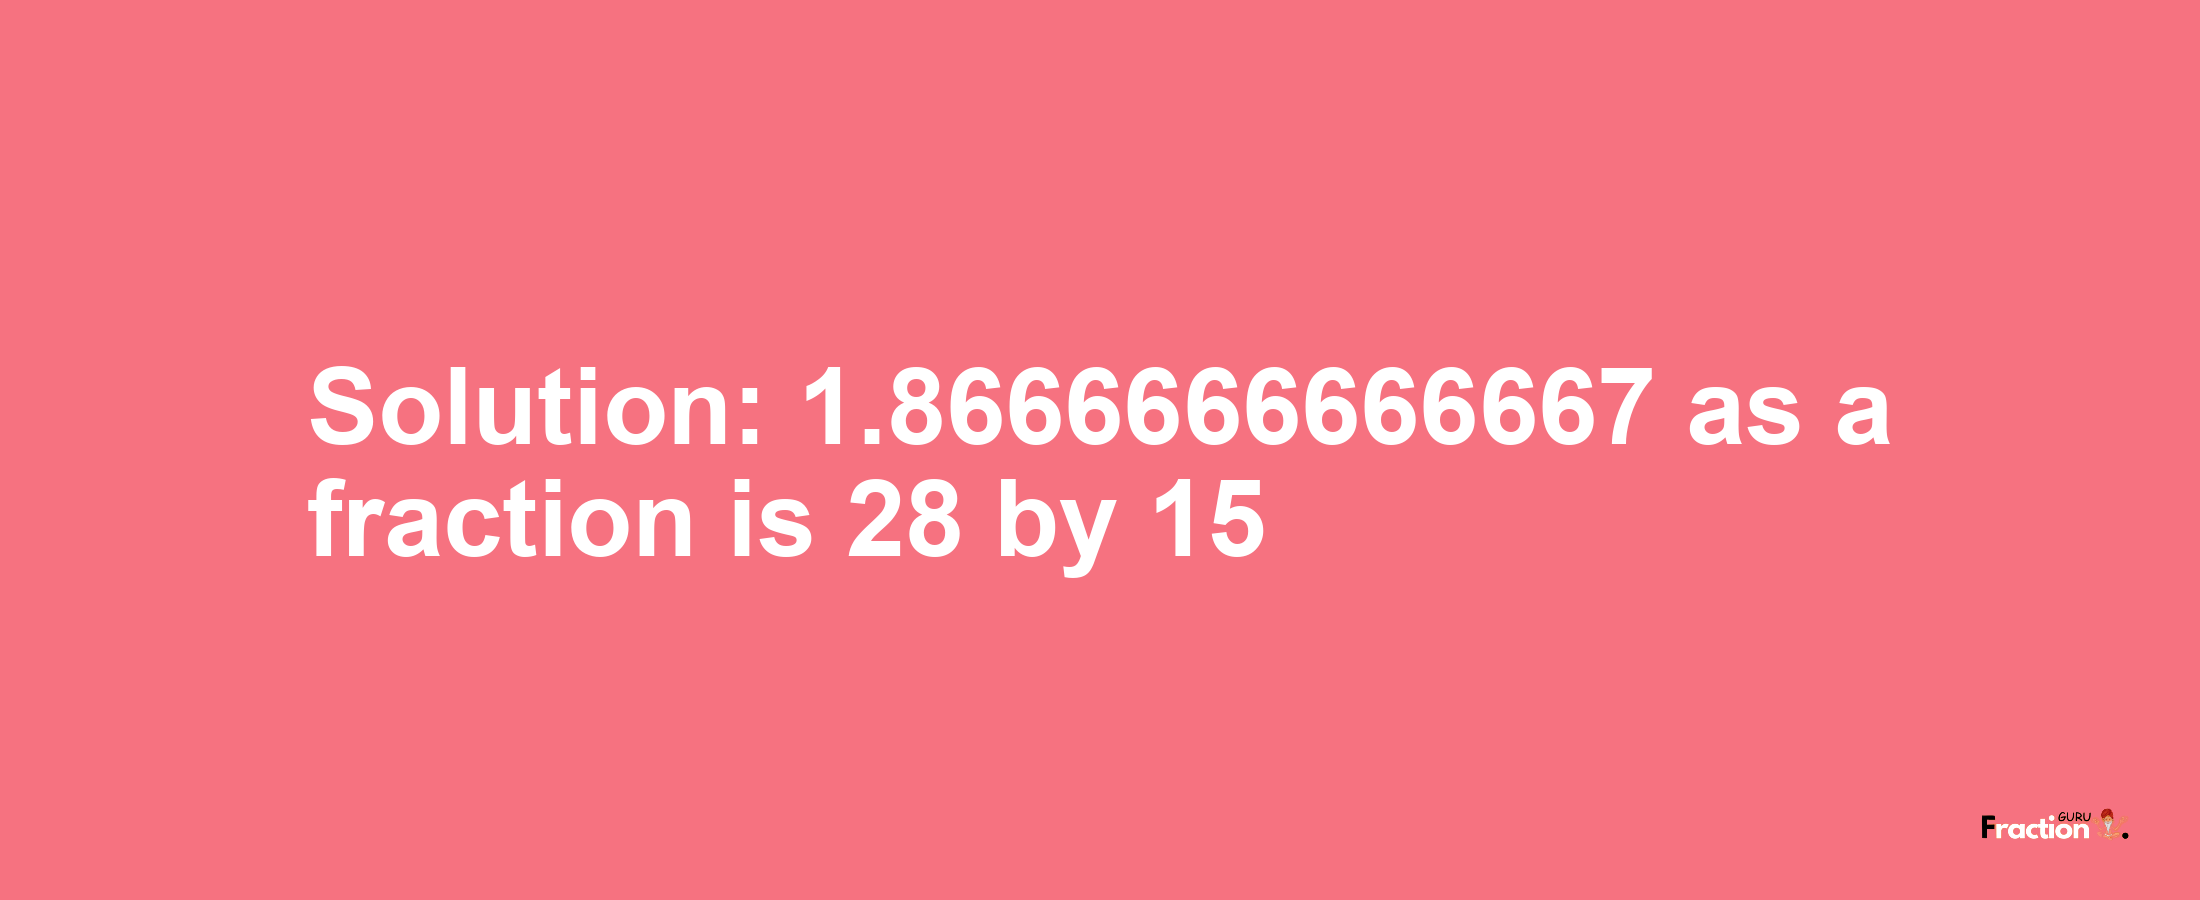 Solution:1.8666666666667 as a fraction is 28/15